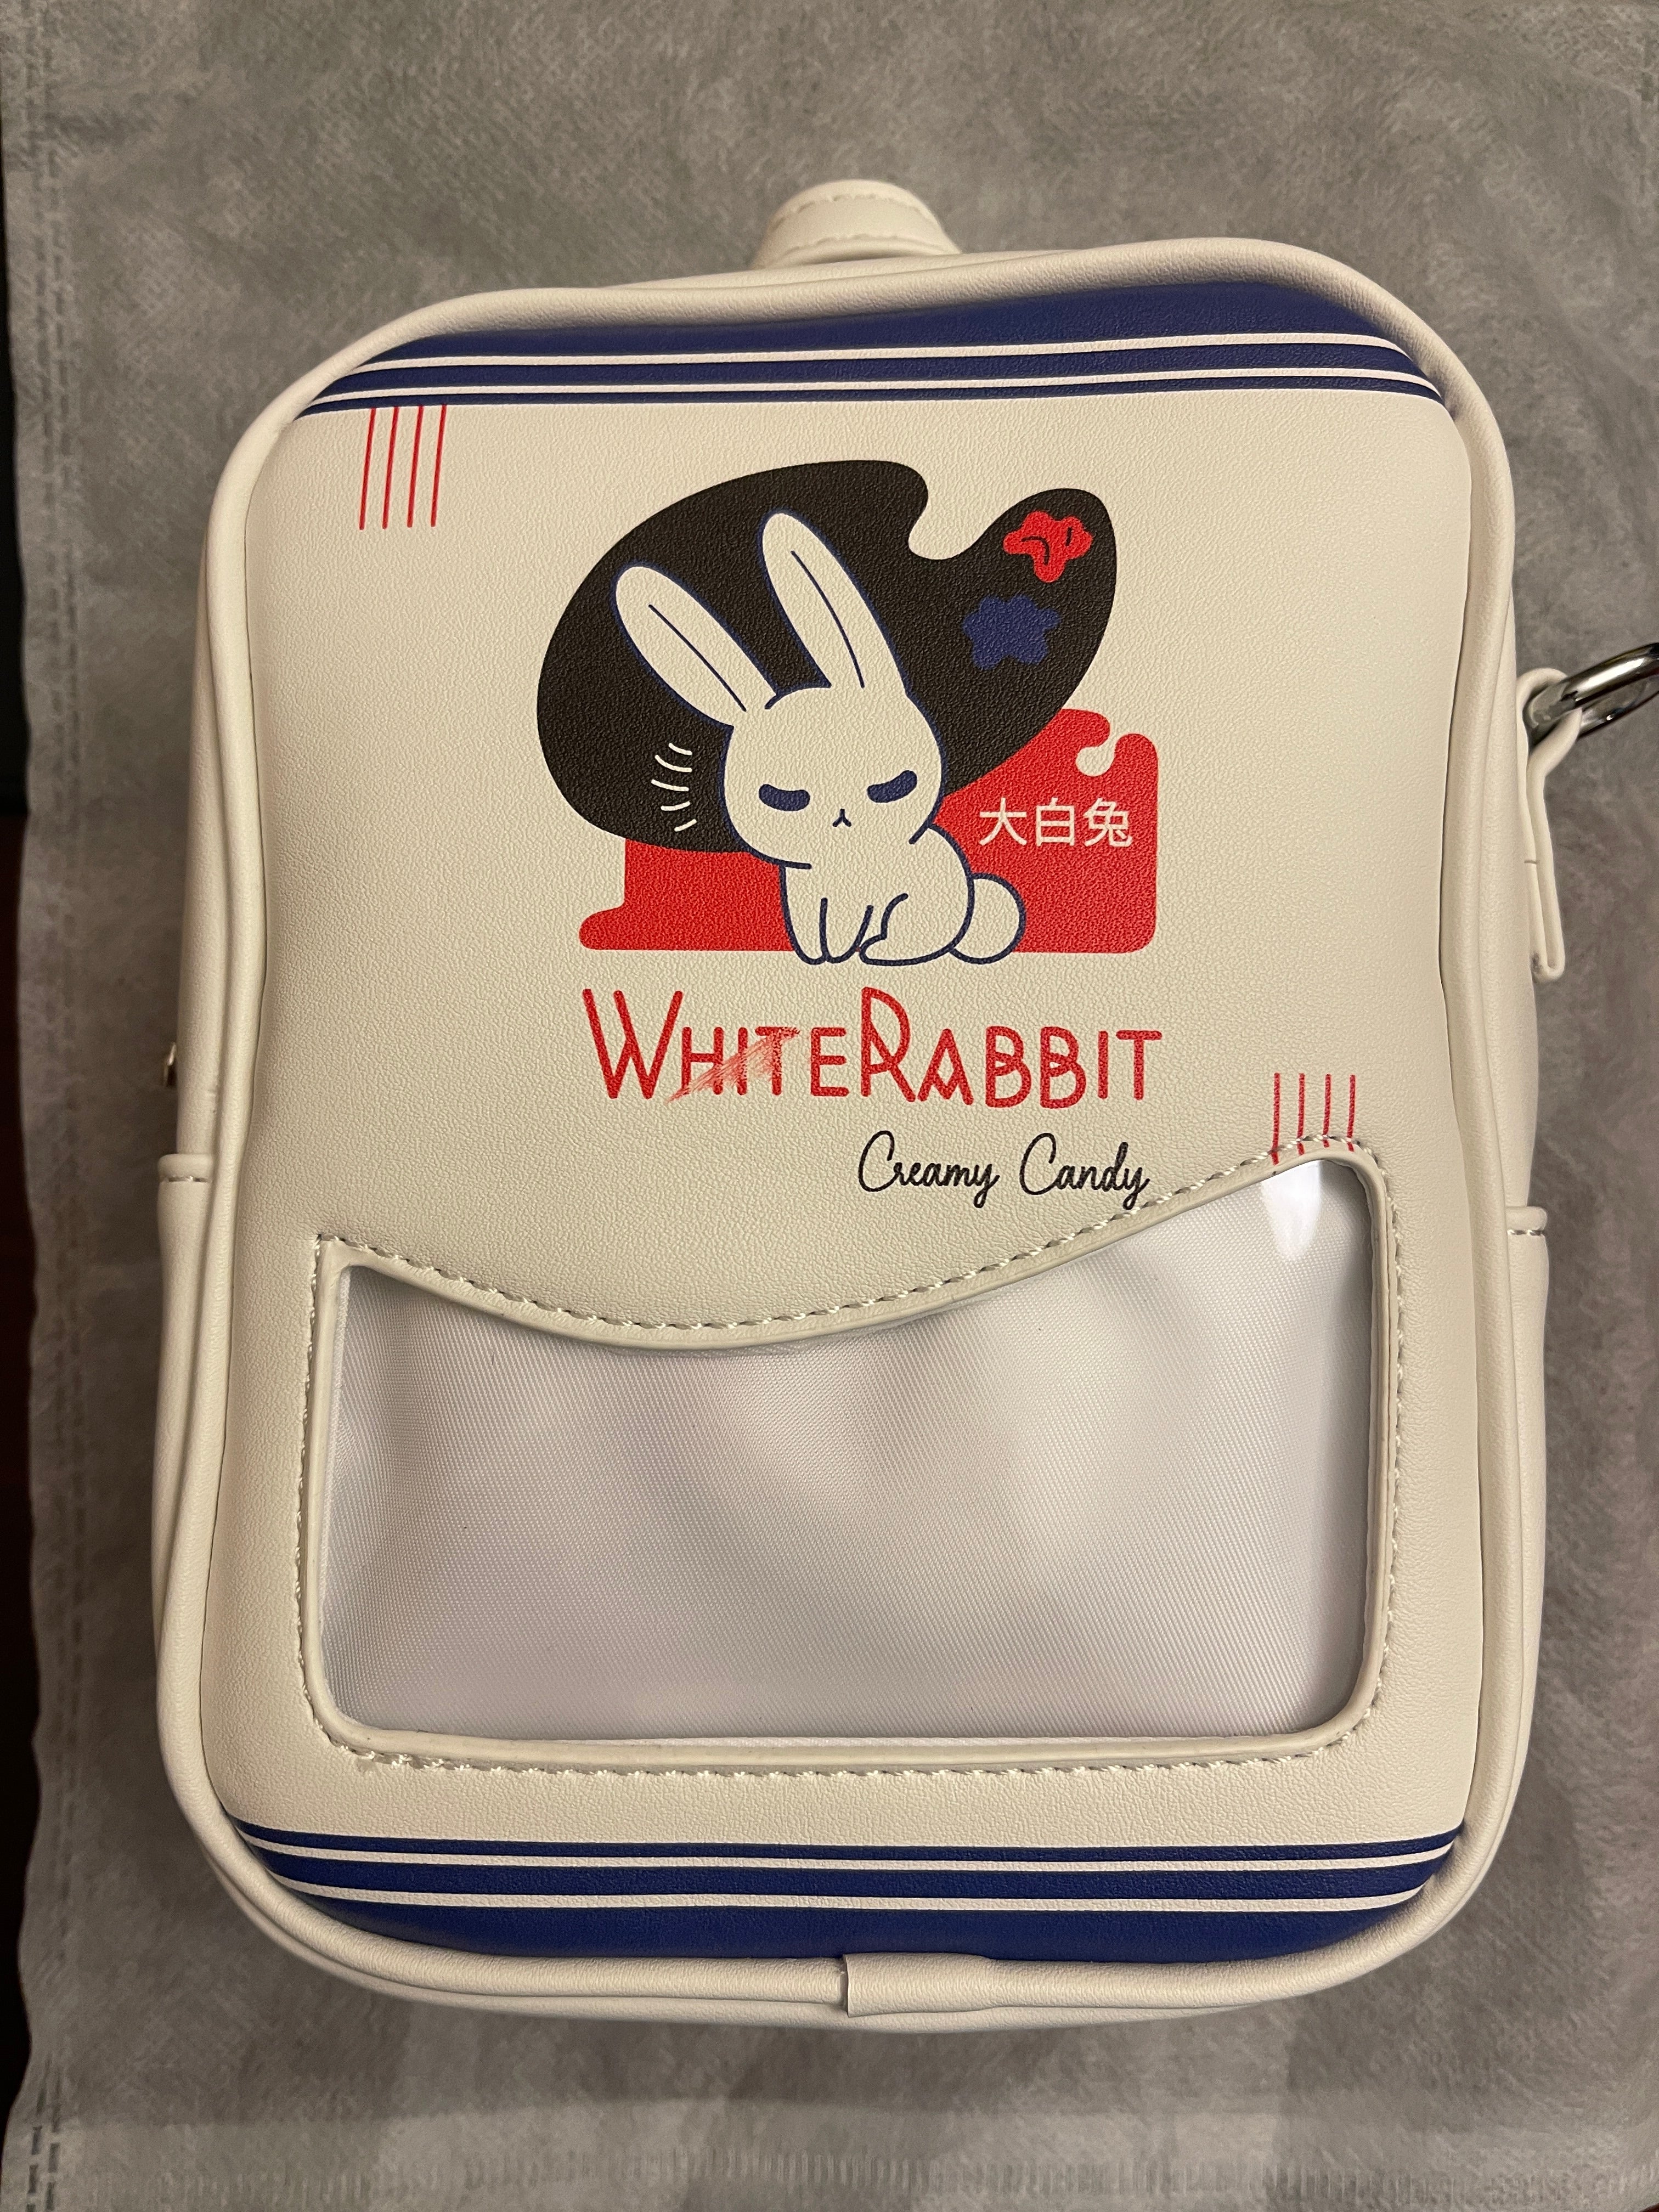 These are the White Rabbit flavoured treats you must try in Toronto | Dished